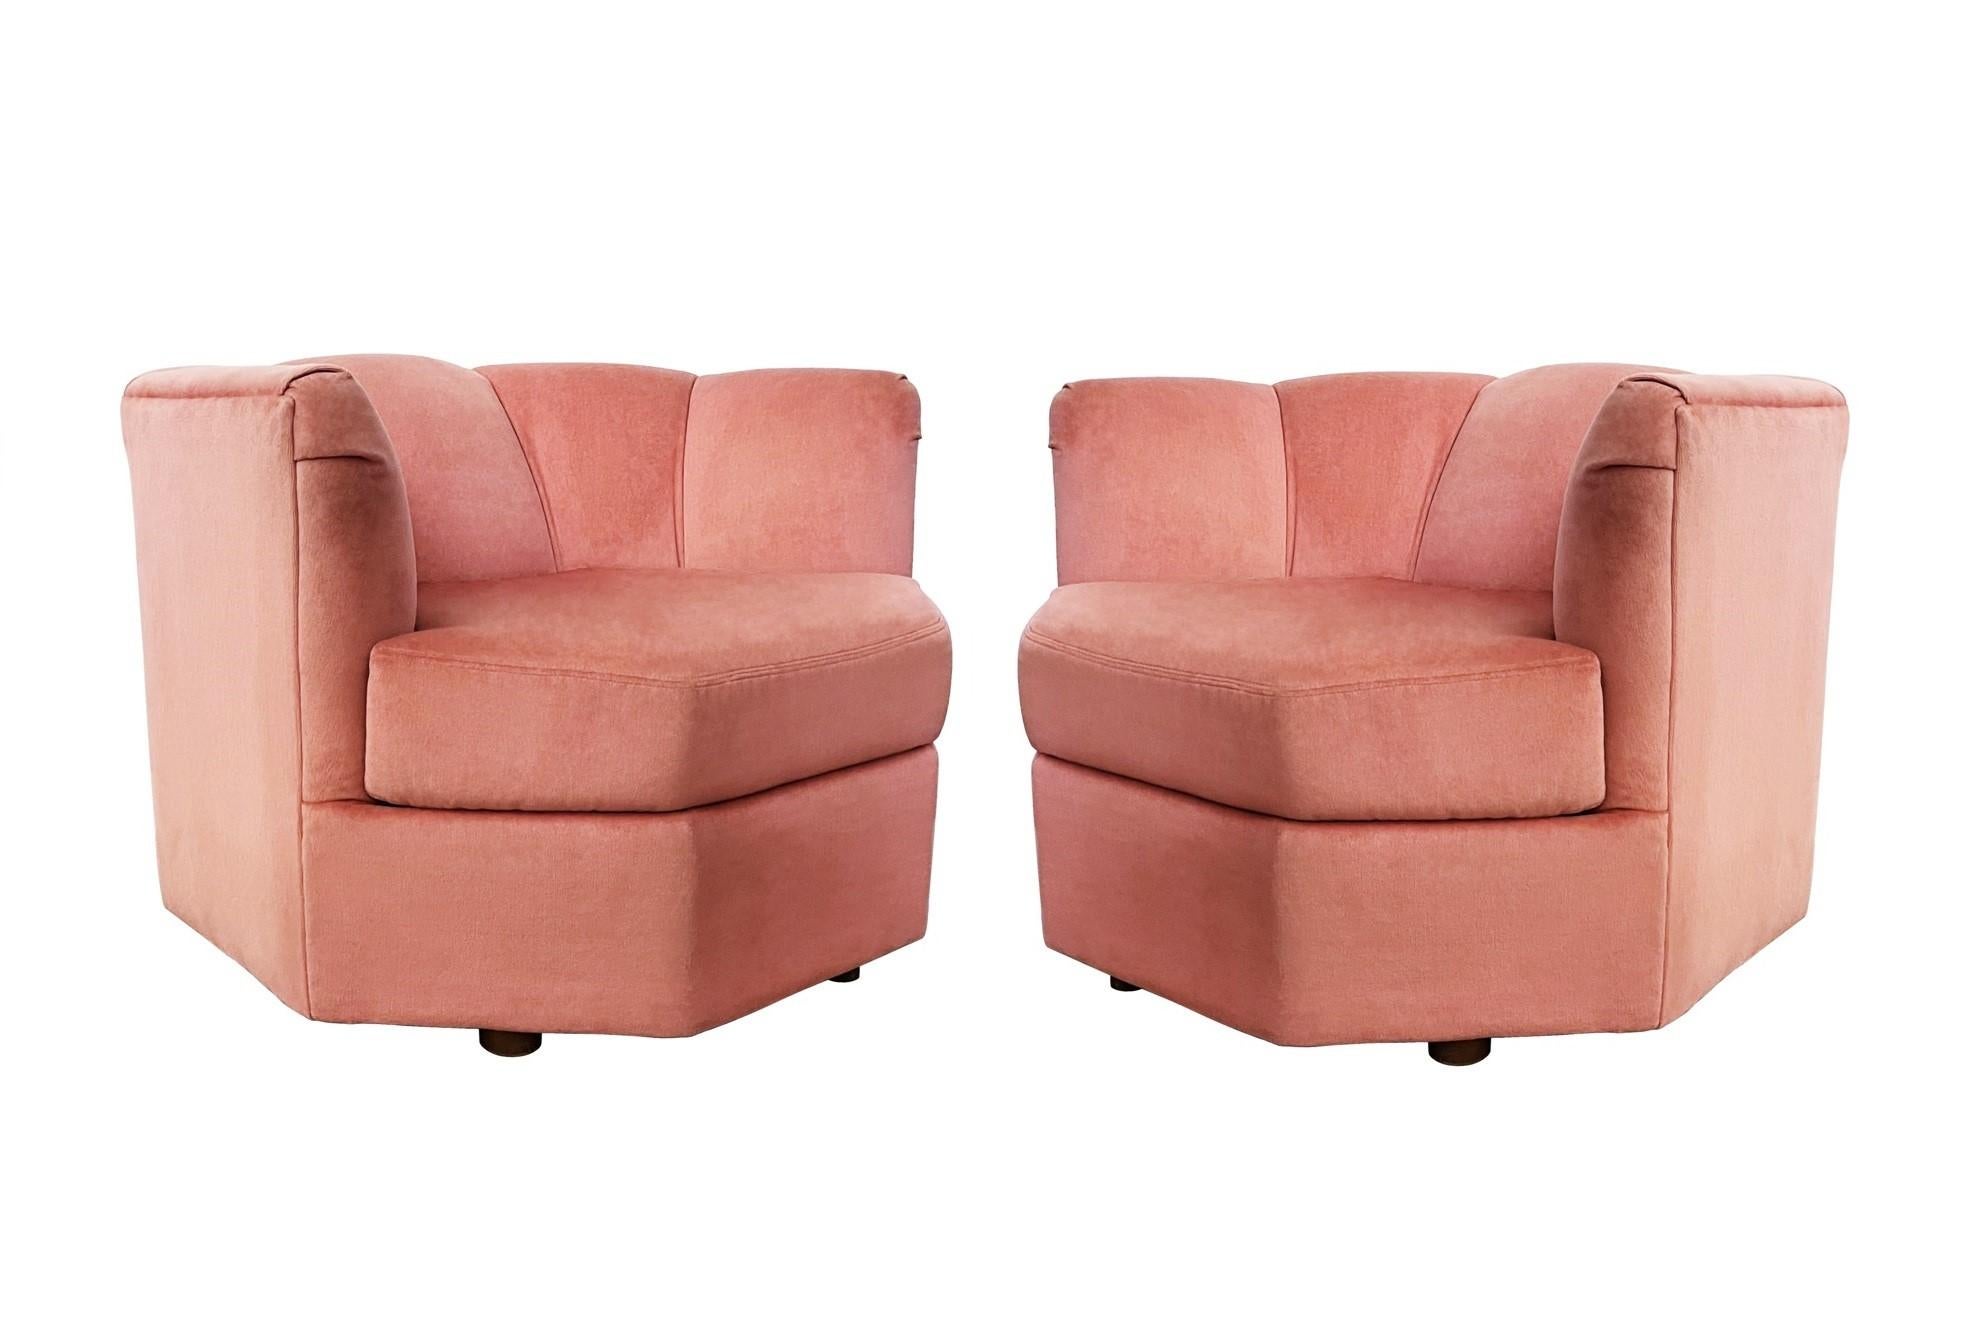 1970s Hexagonal Club Chairs in a Dusty Rose Velvet For Sale 2